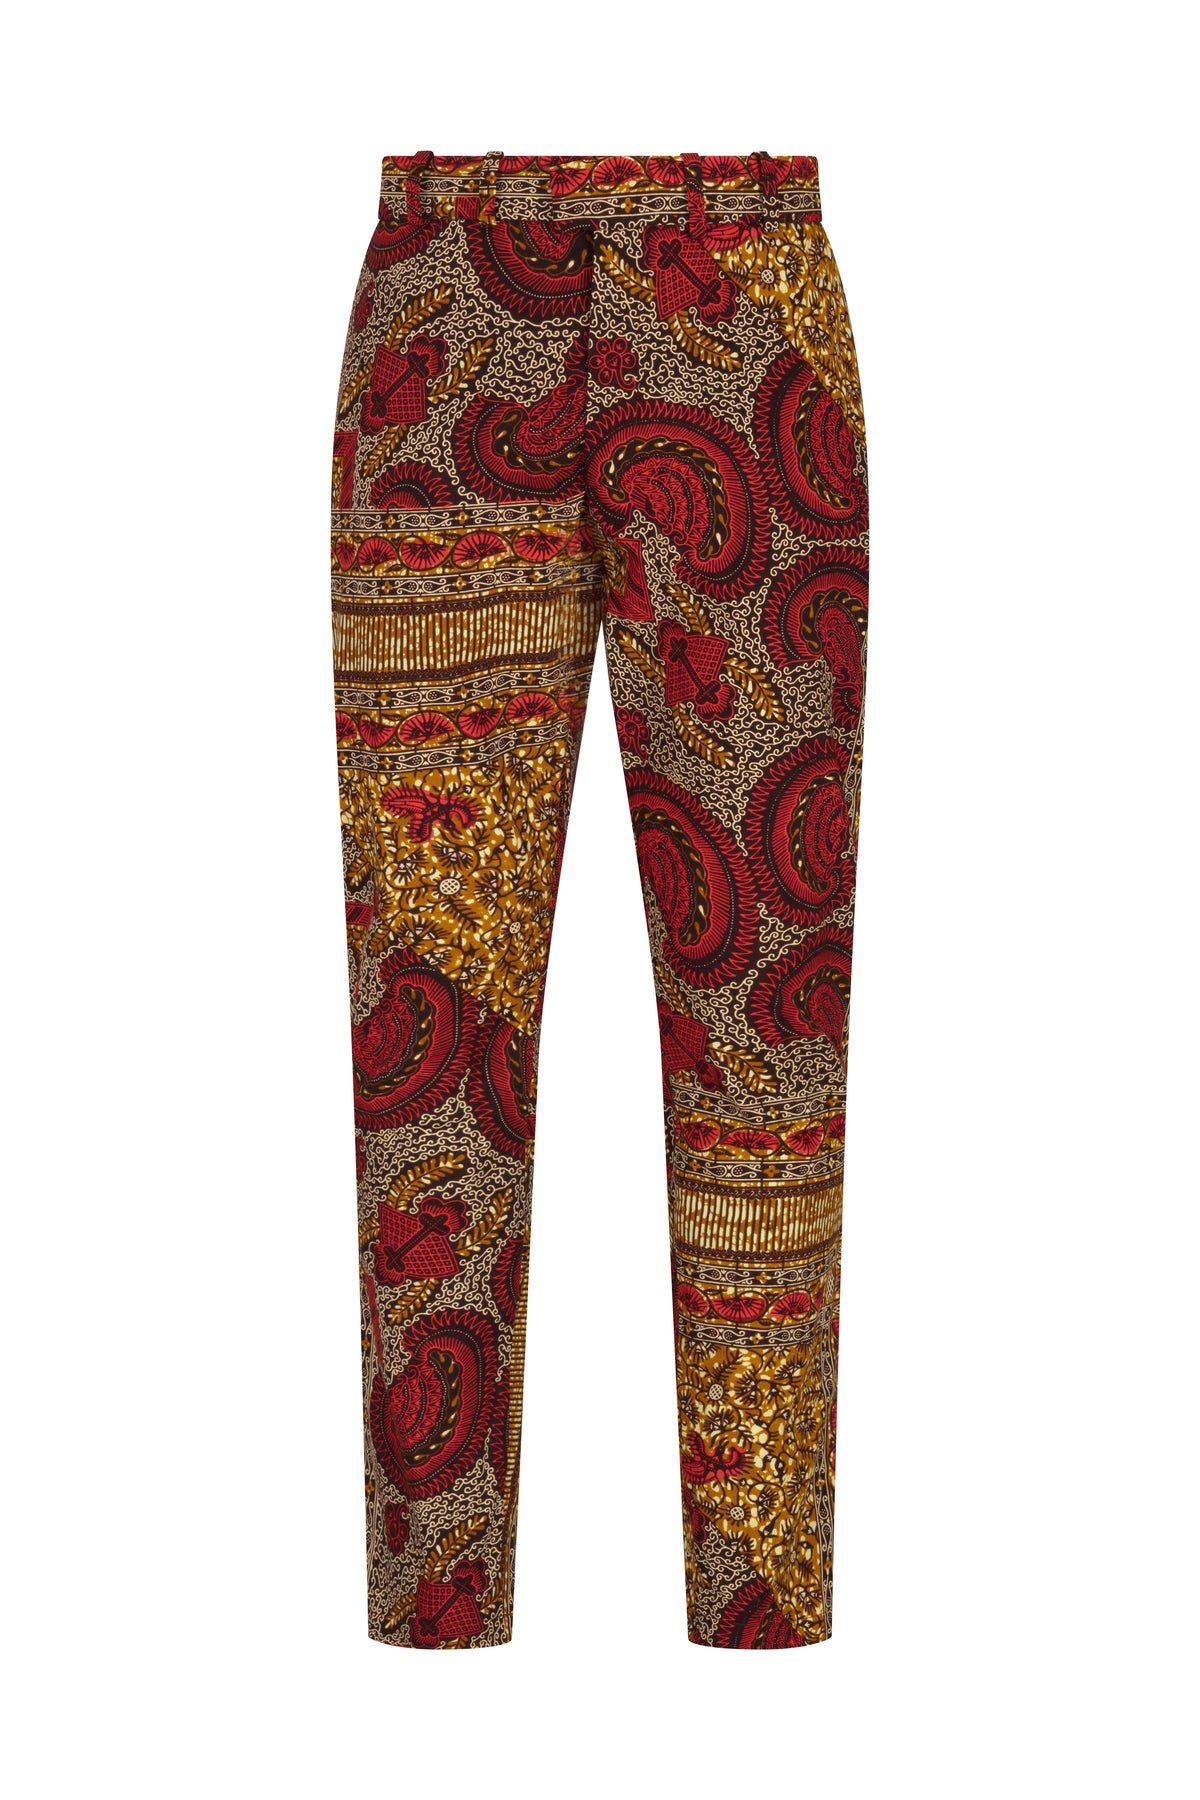 African print trousers